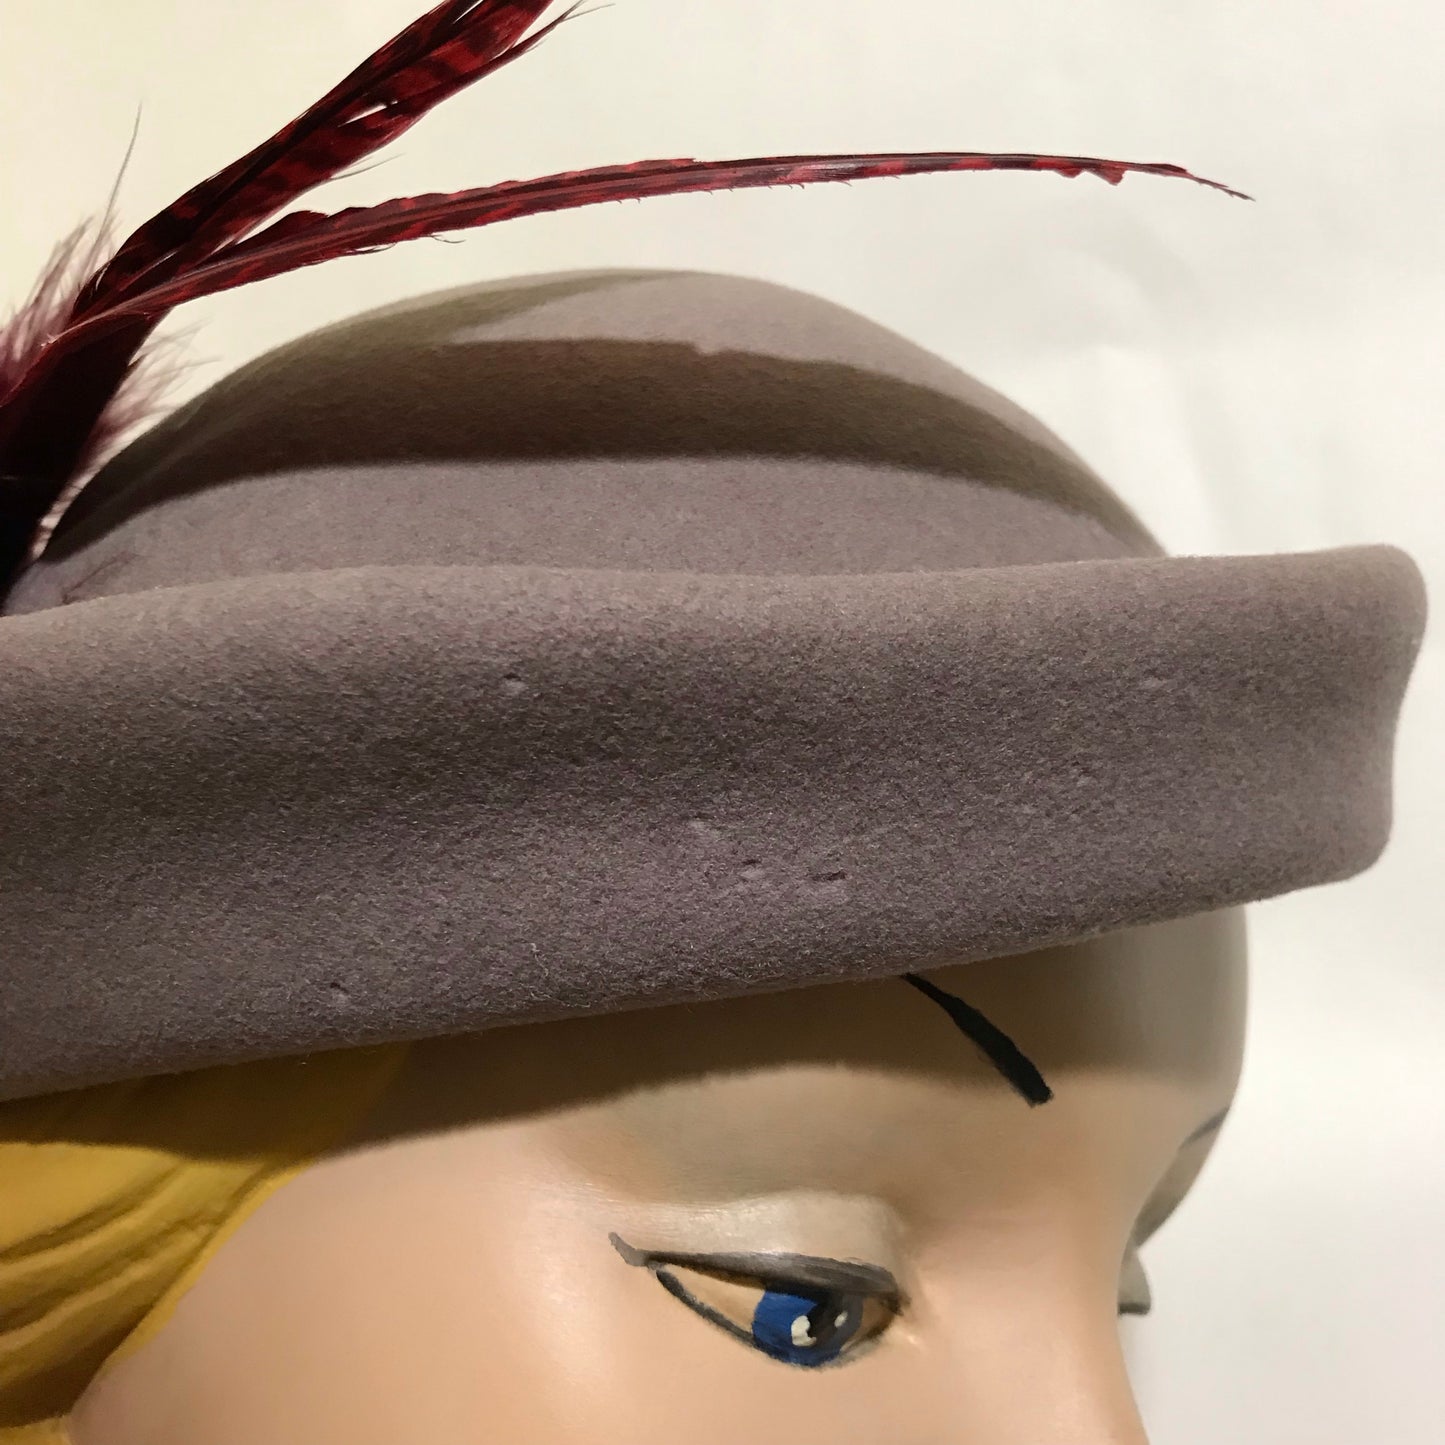 Felted Wool Grey Hat with Vivid Wine Colored Feathers circa 1940s